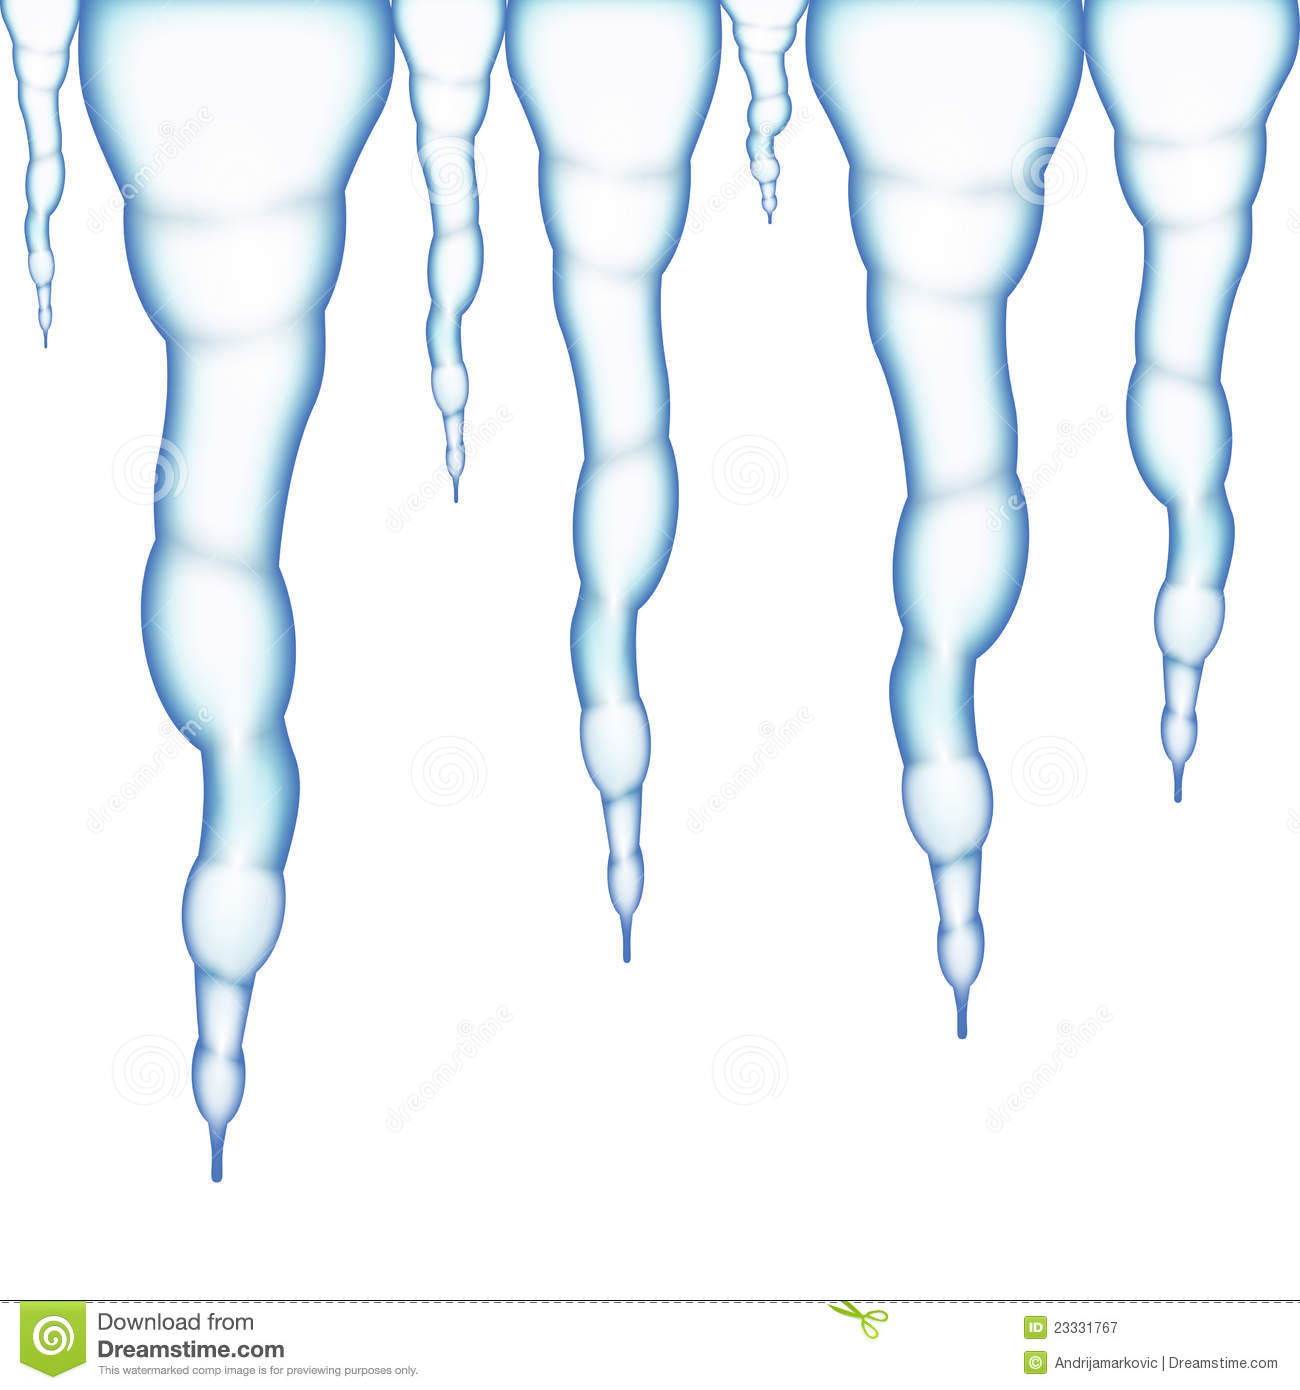 Icicles Royalty Free Stock Photography   Image  23331767